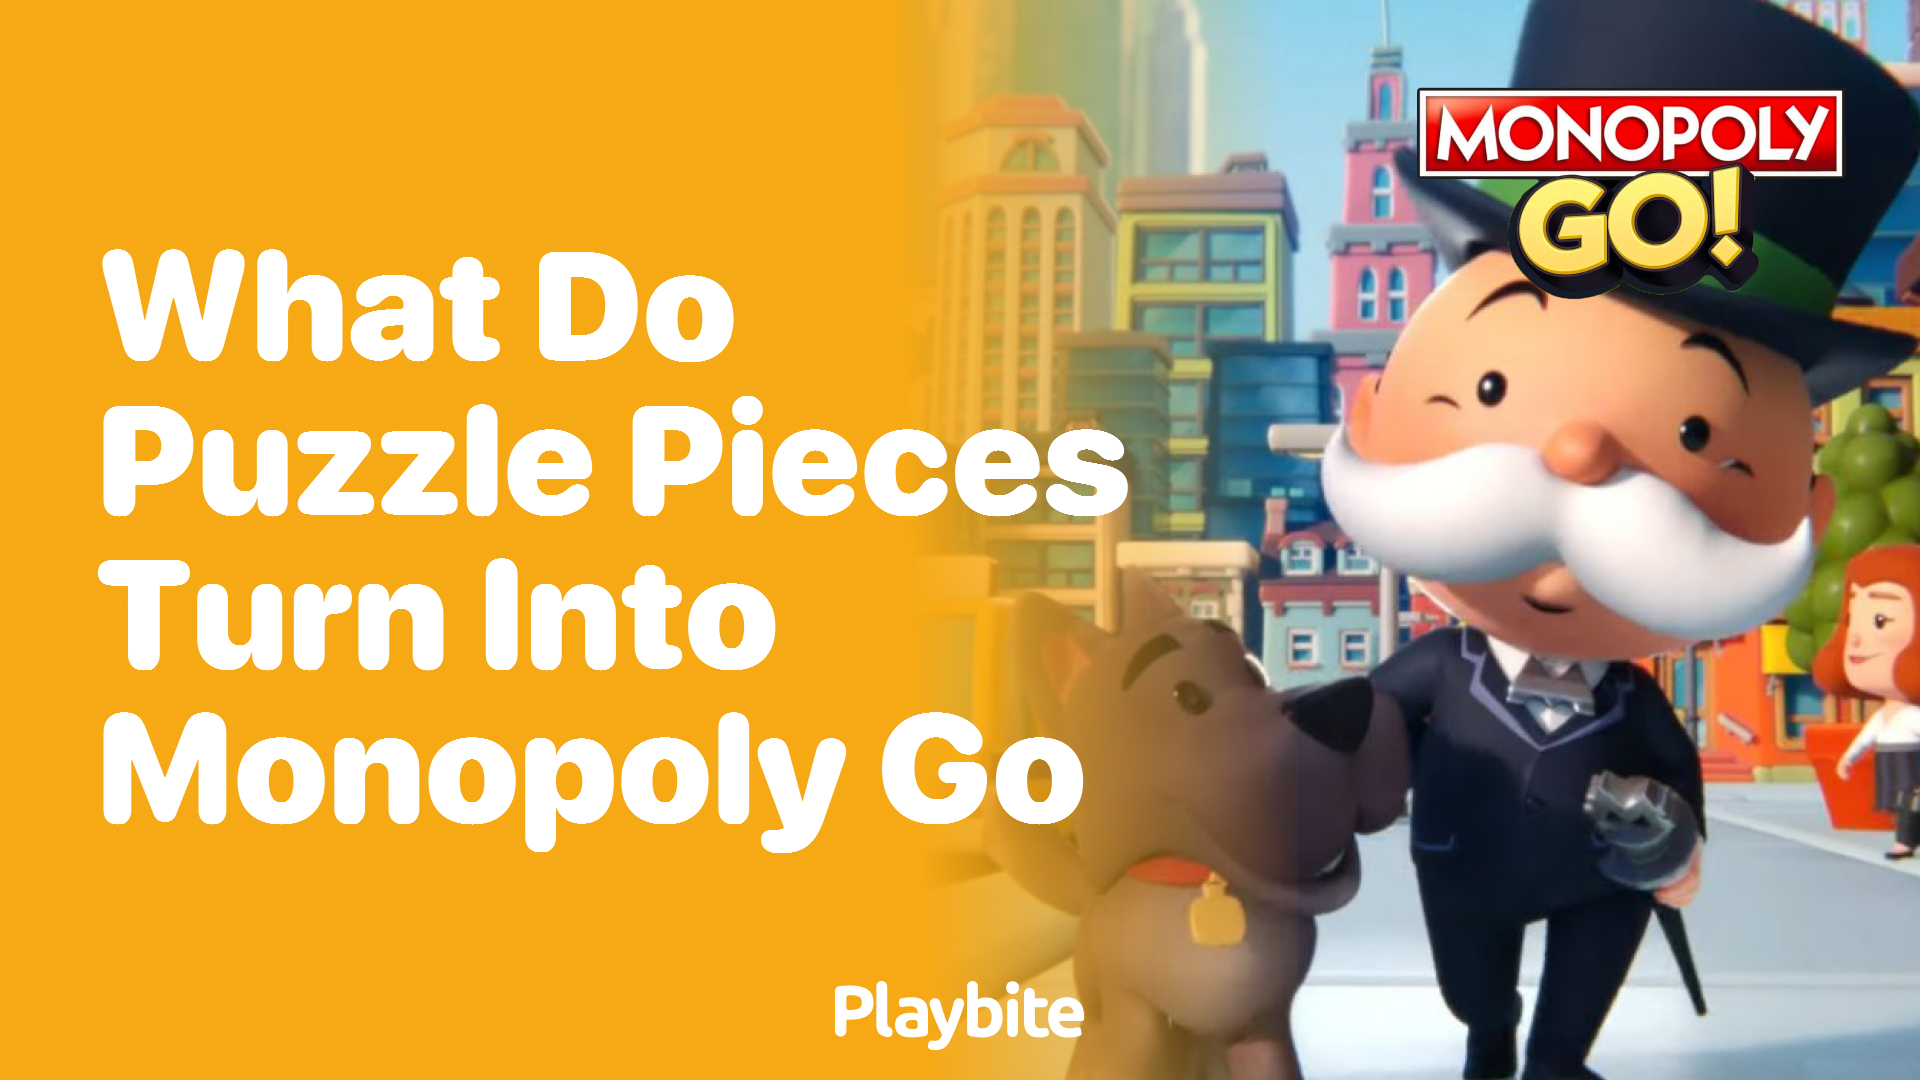 What Do Puzzle Pieces Turn Into in Monopoly Go?